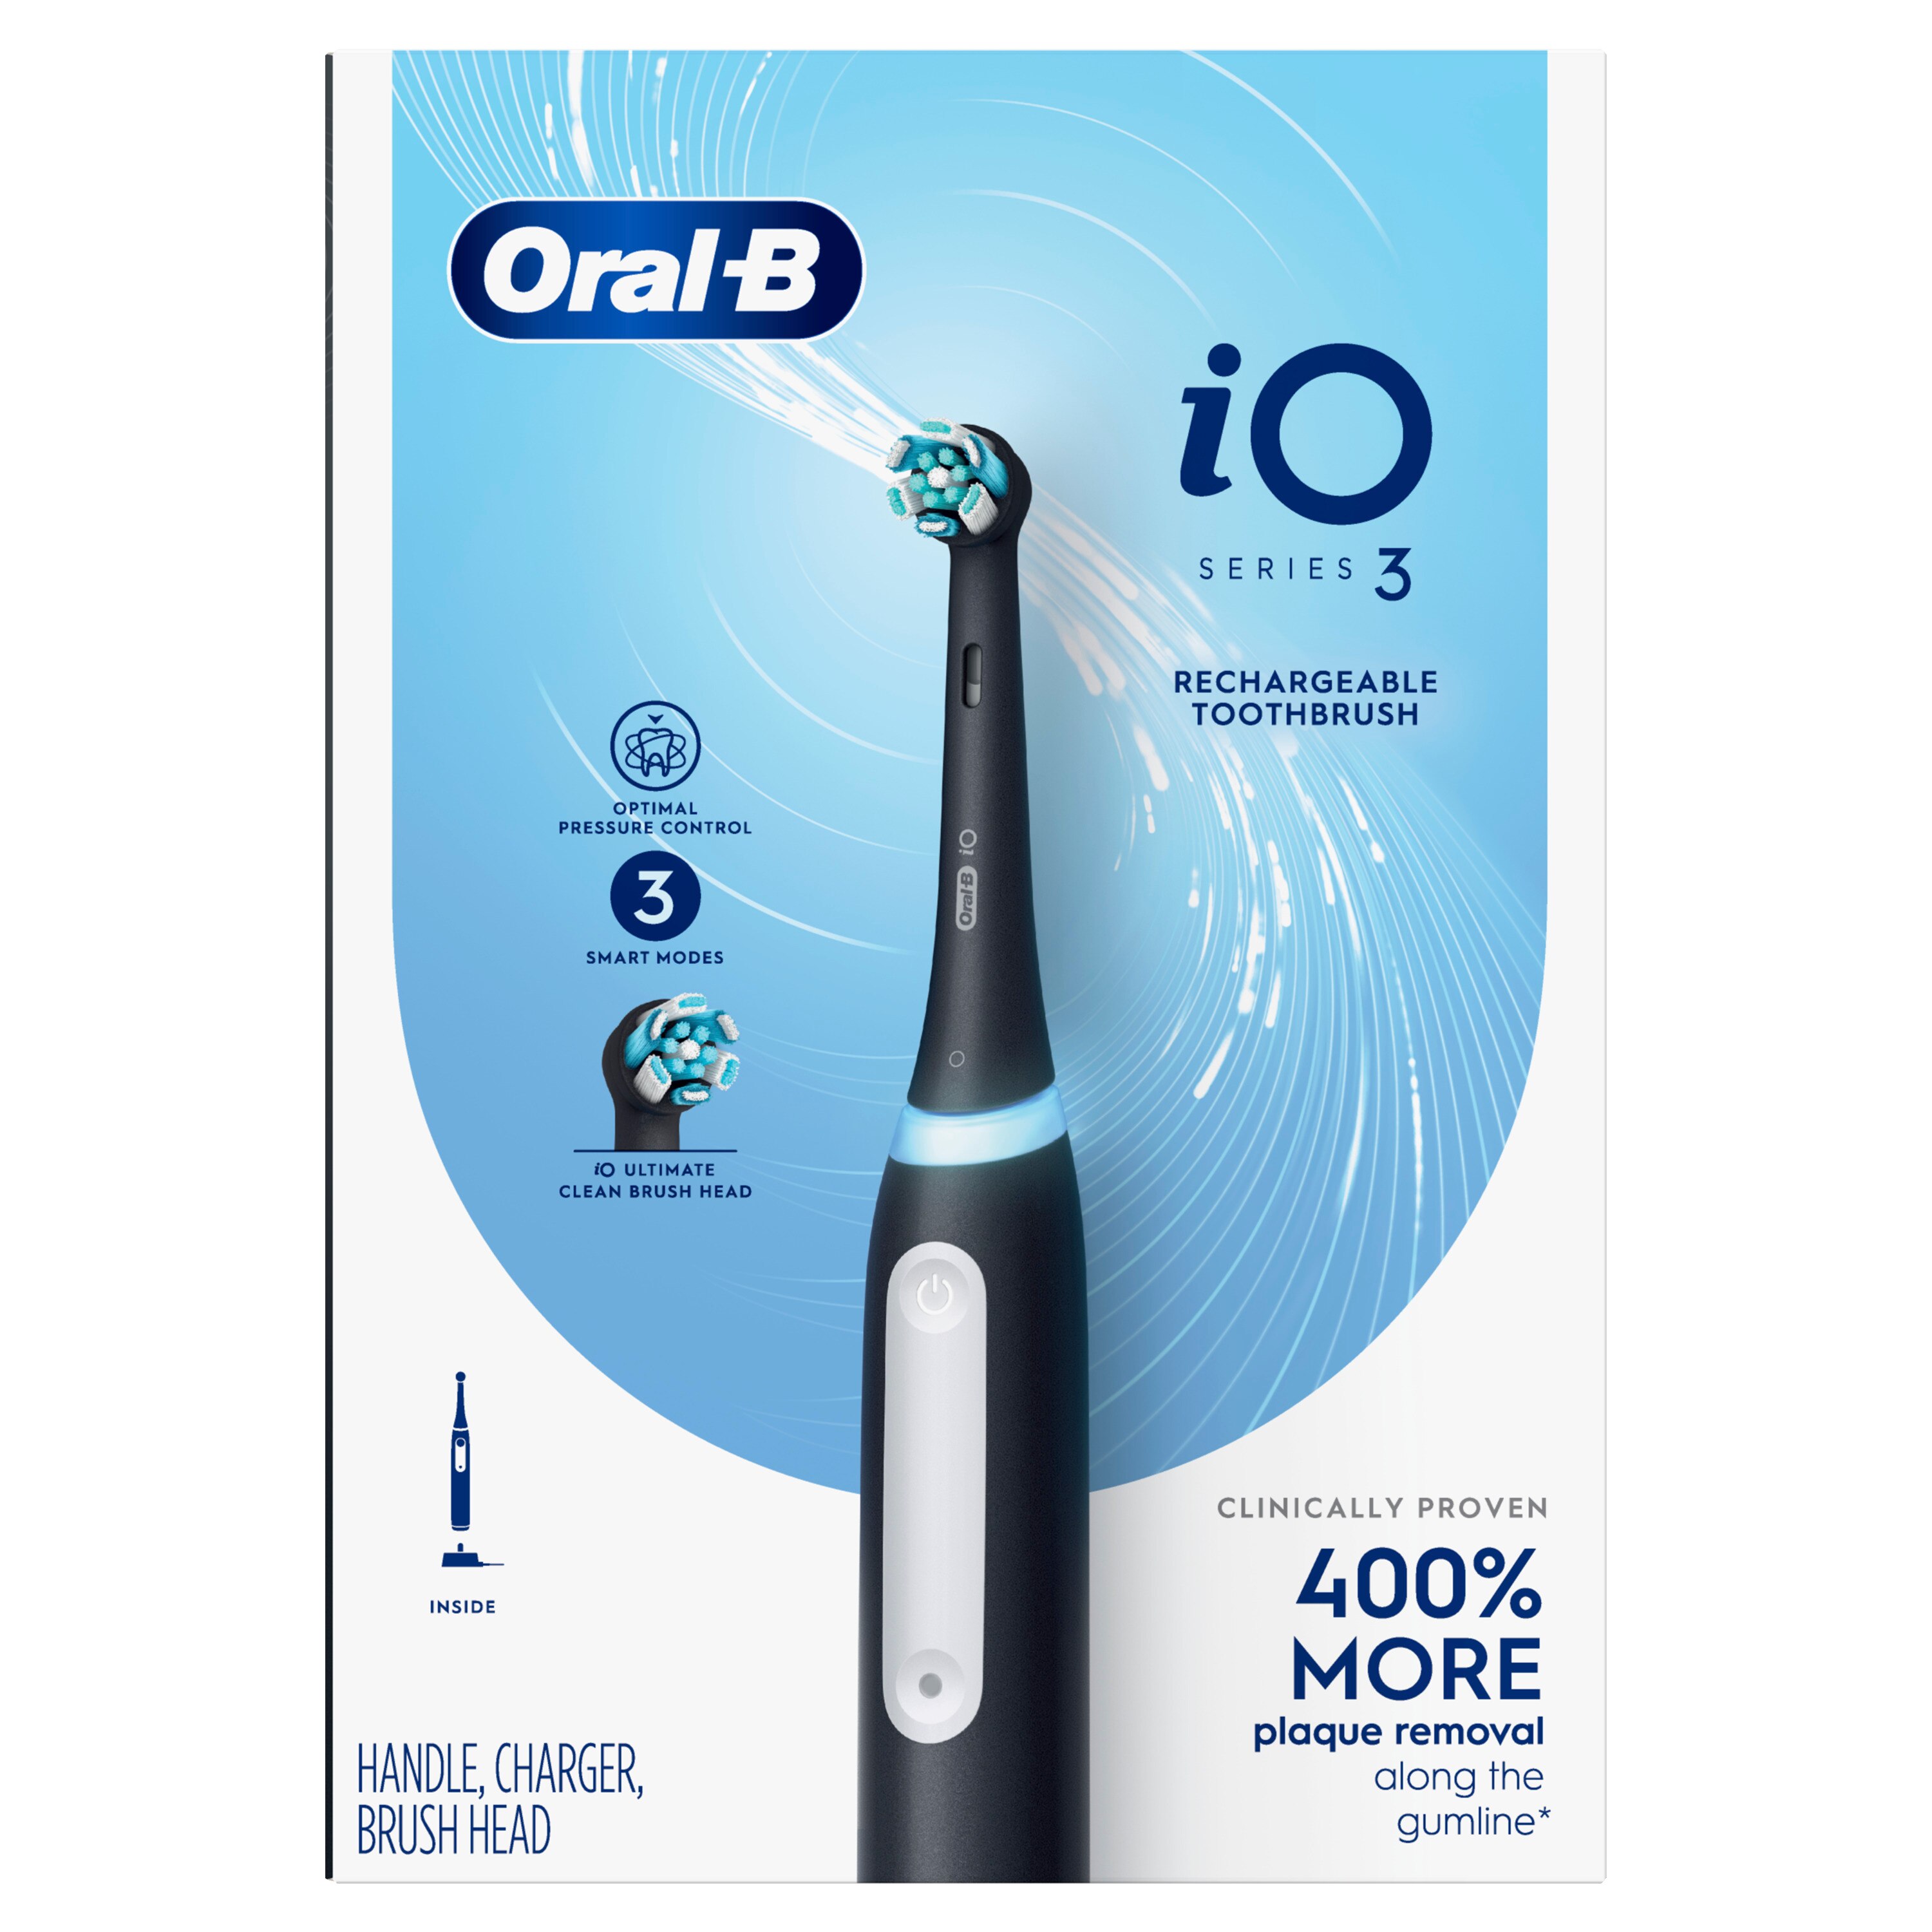 Oral-B iO Series 3 Rechargeable Electric Toothbrush with Handle, Charger, and Brush Head